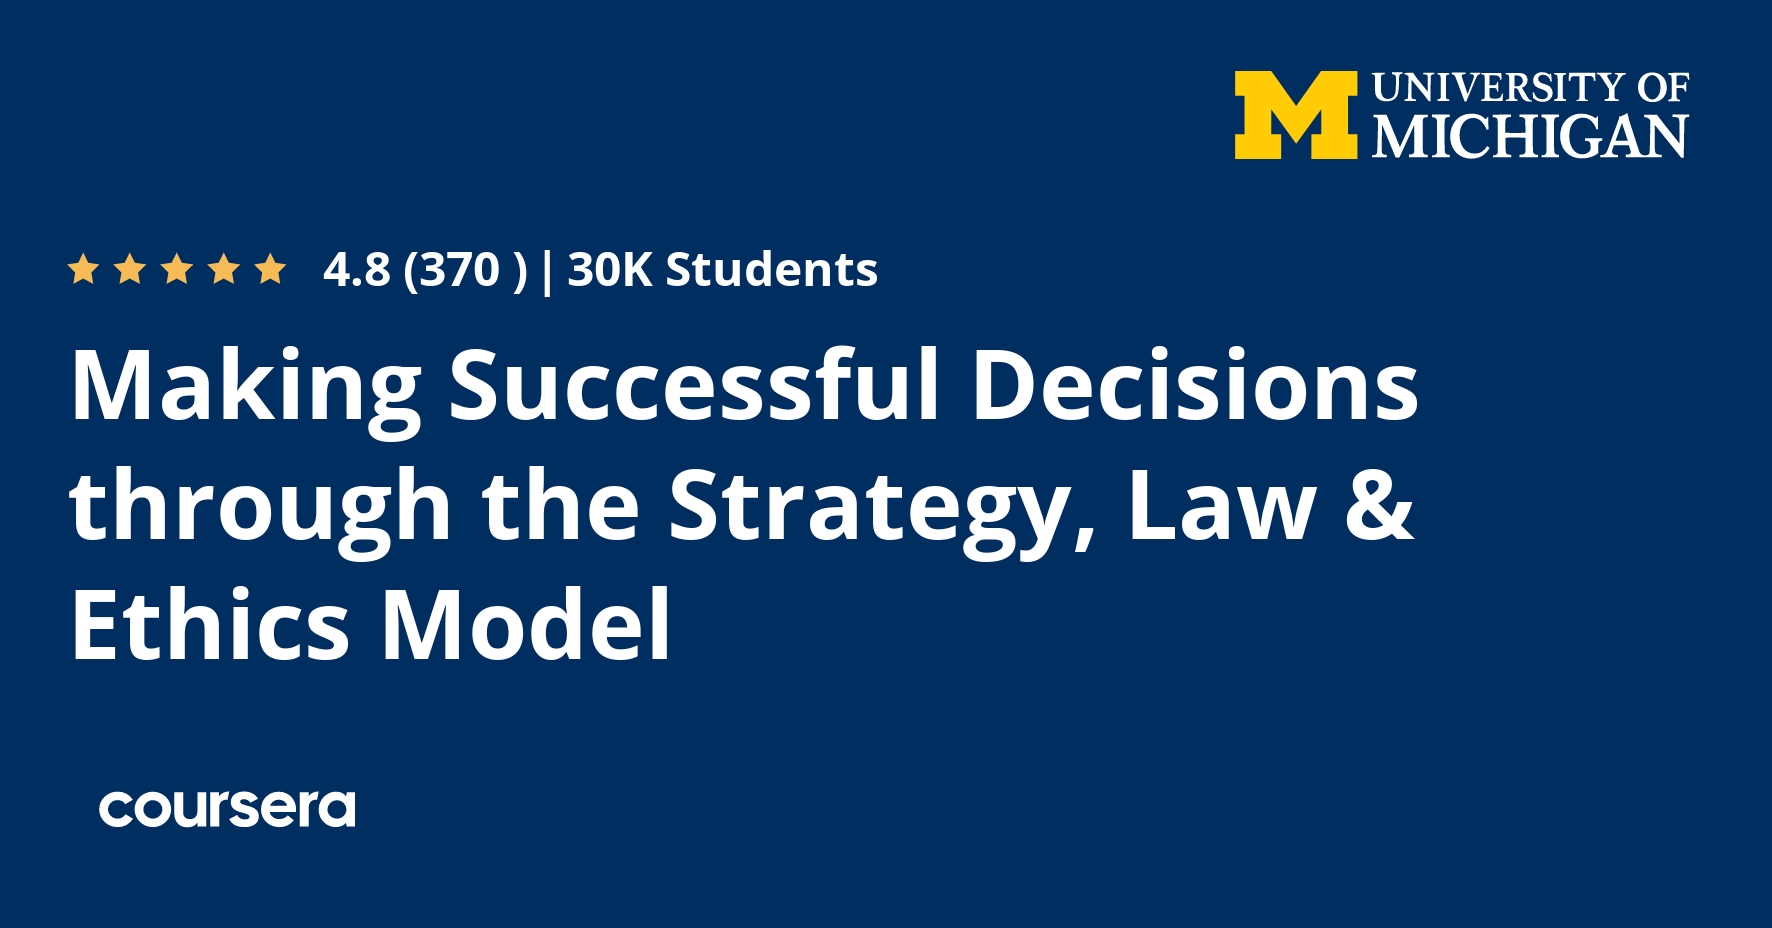 Making Successful Decisions through the Strategy, Law & Ethics Model ...